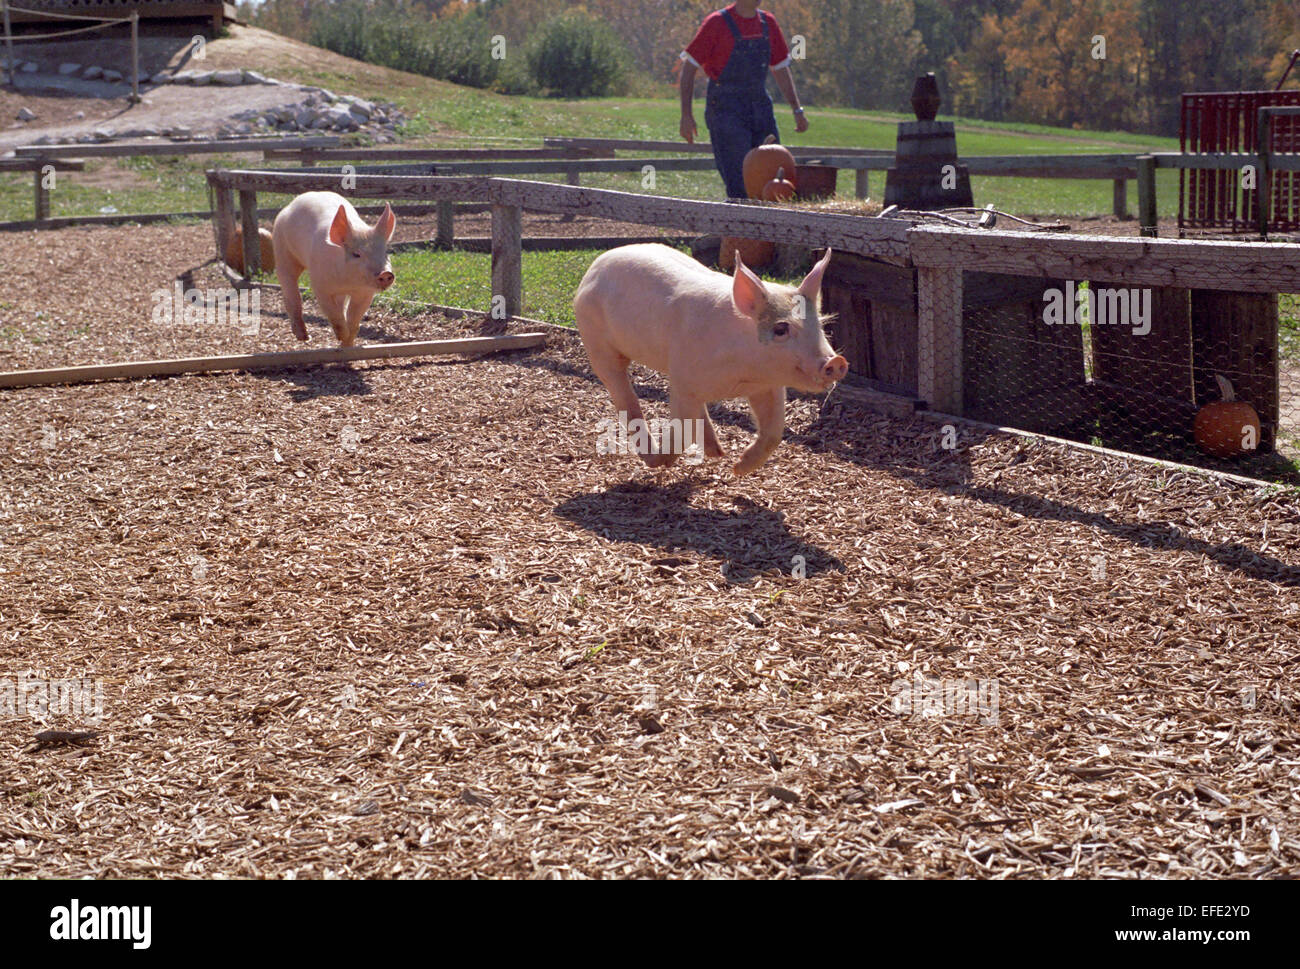 Pig racing event at Eckerts Farm in Illinois. Stock Photo